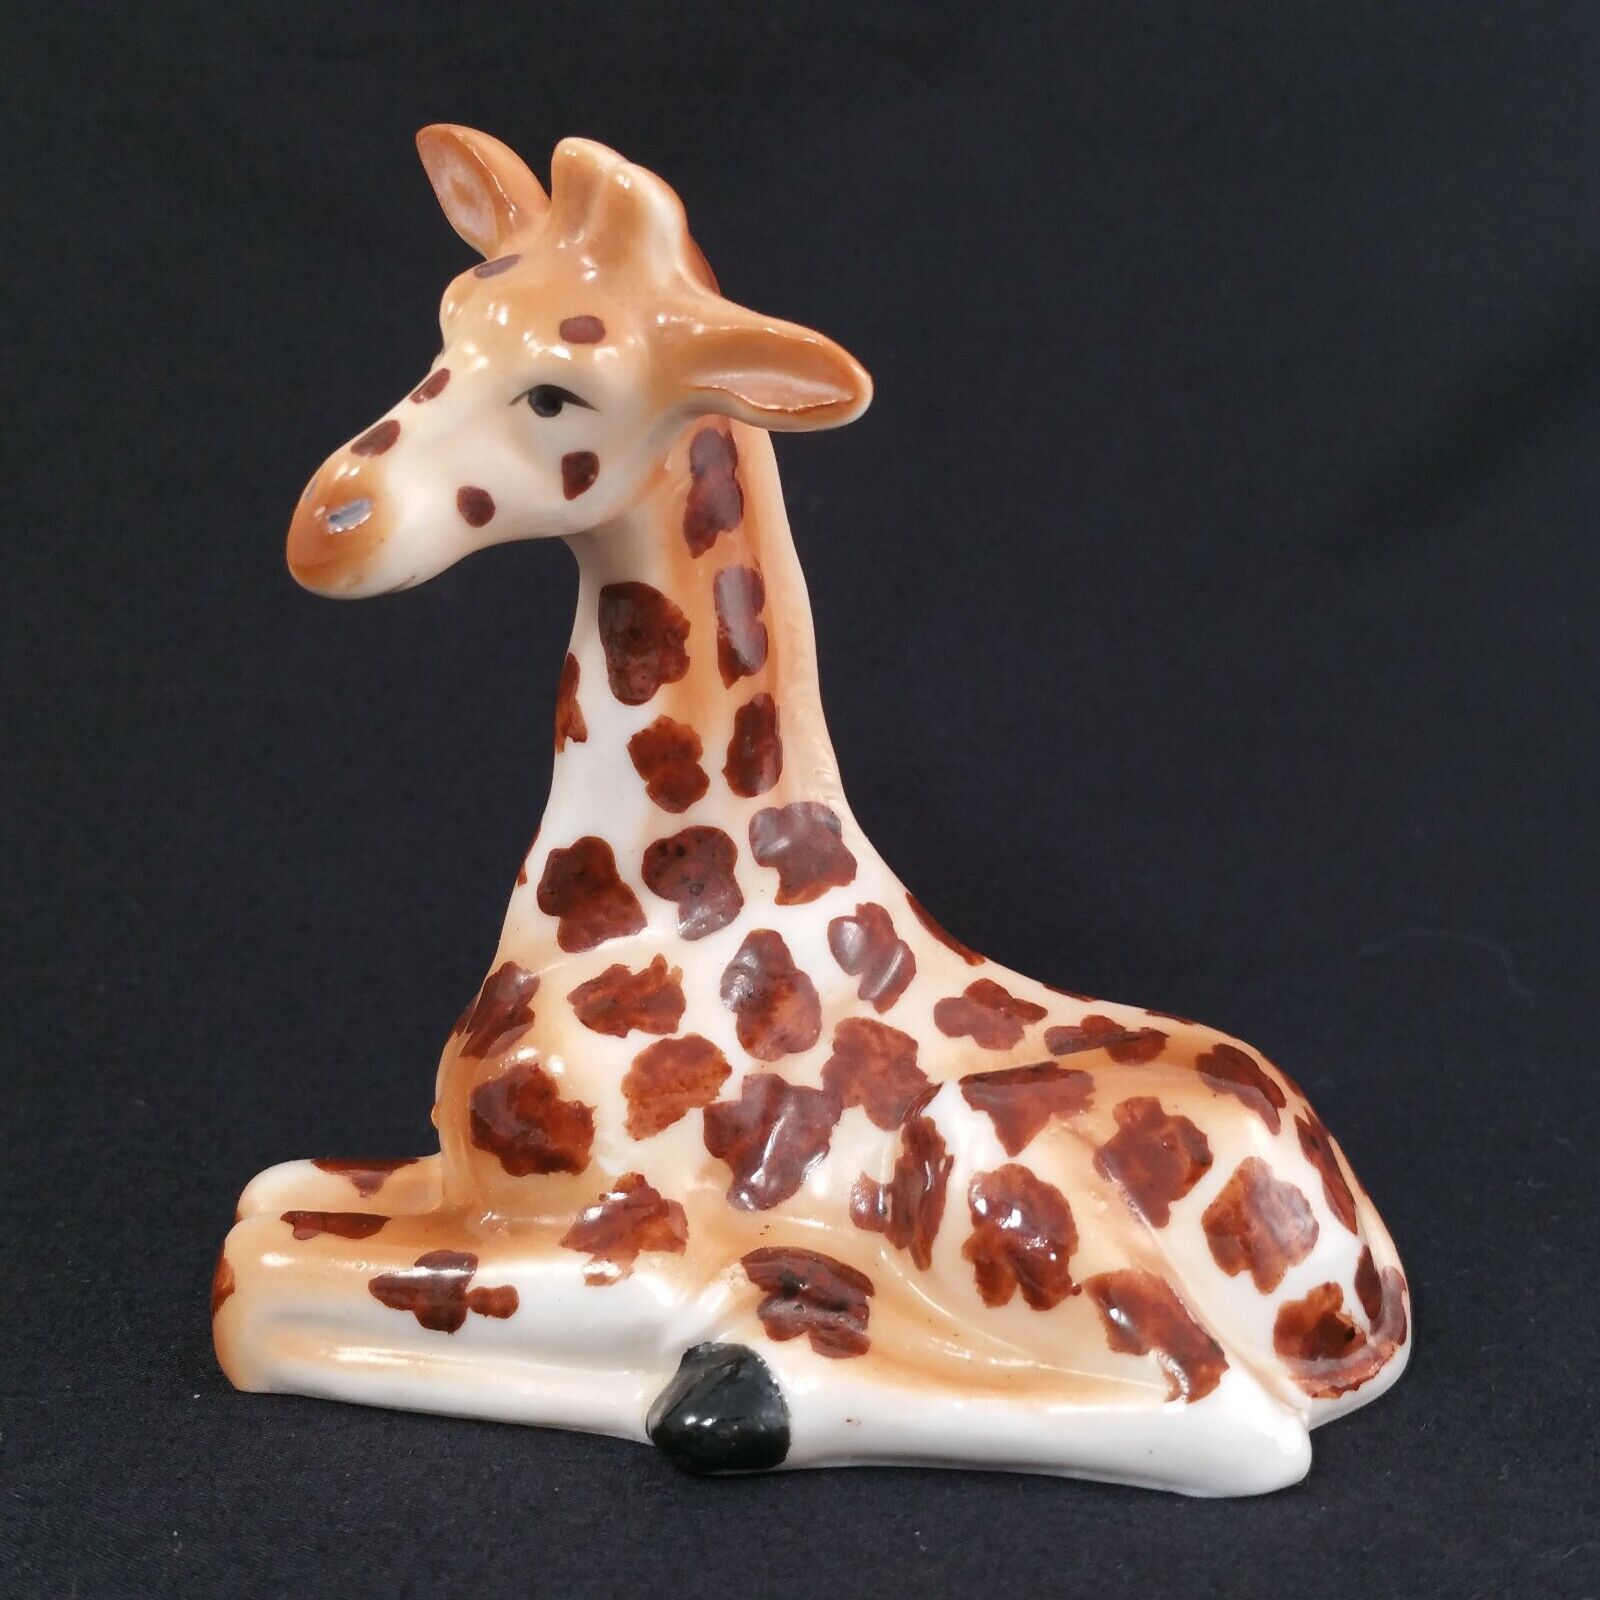 Vintage Porcelain Giraffe Laying Down Figurine Hand Painted